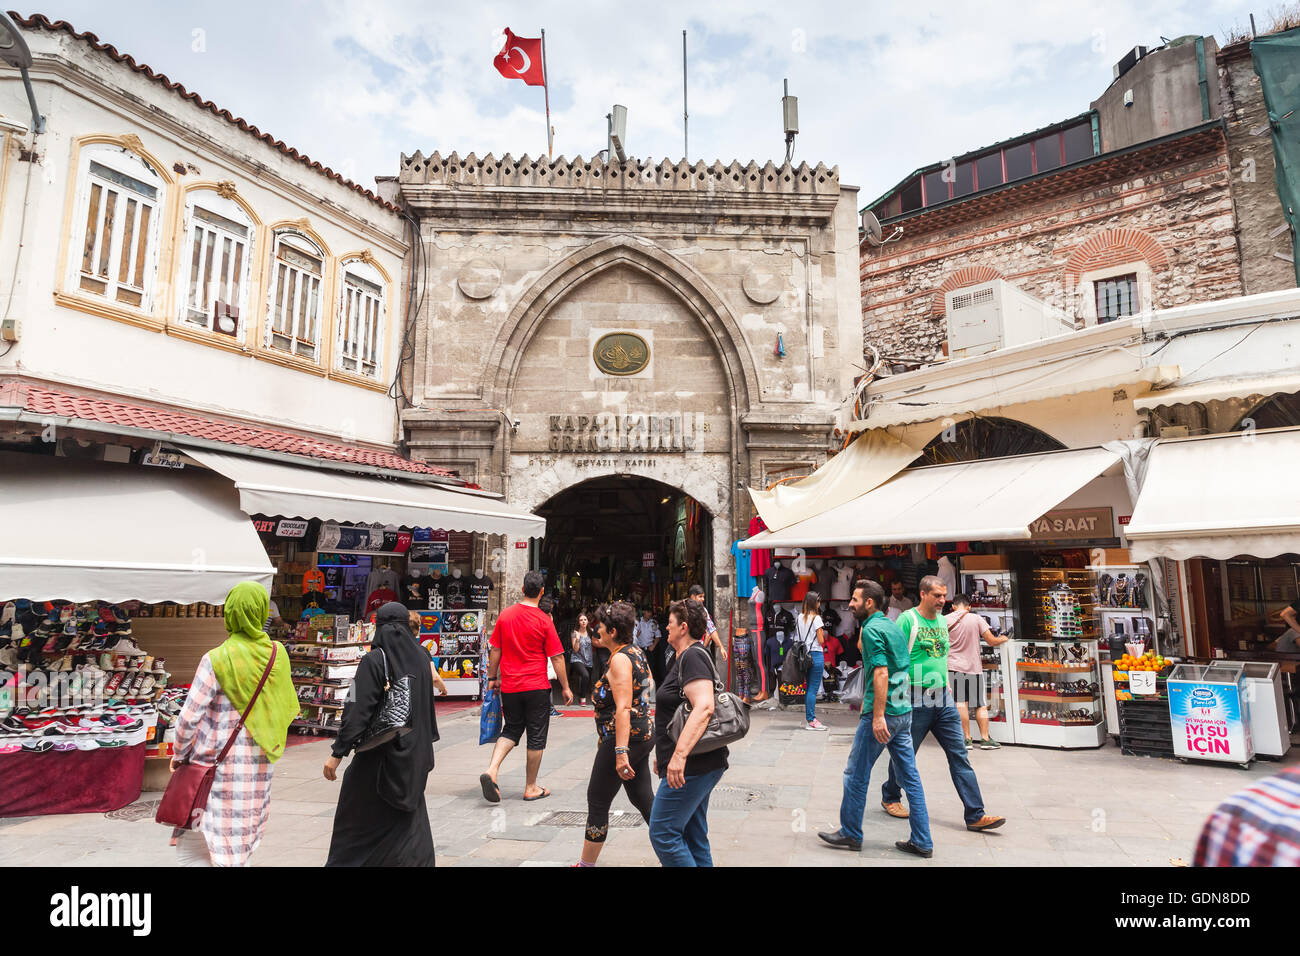 Istanbul, Turkey - June 28, 2016: Ordinary people walk on the street in old central district of Istanbul city near Grand Bazaar Stock Photo